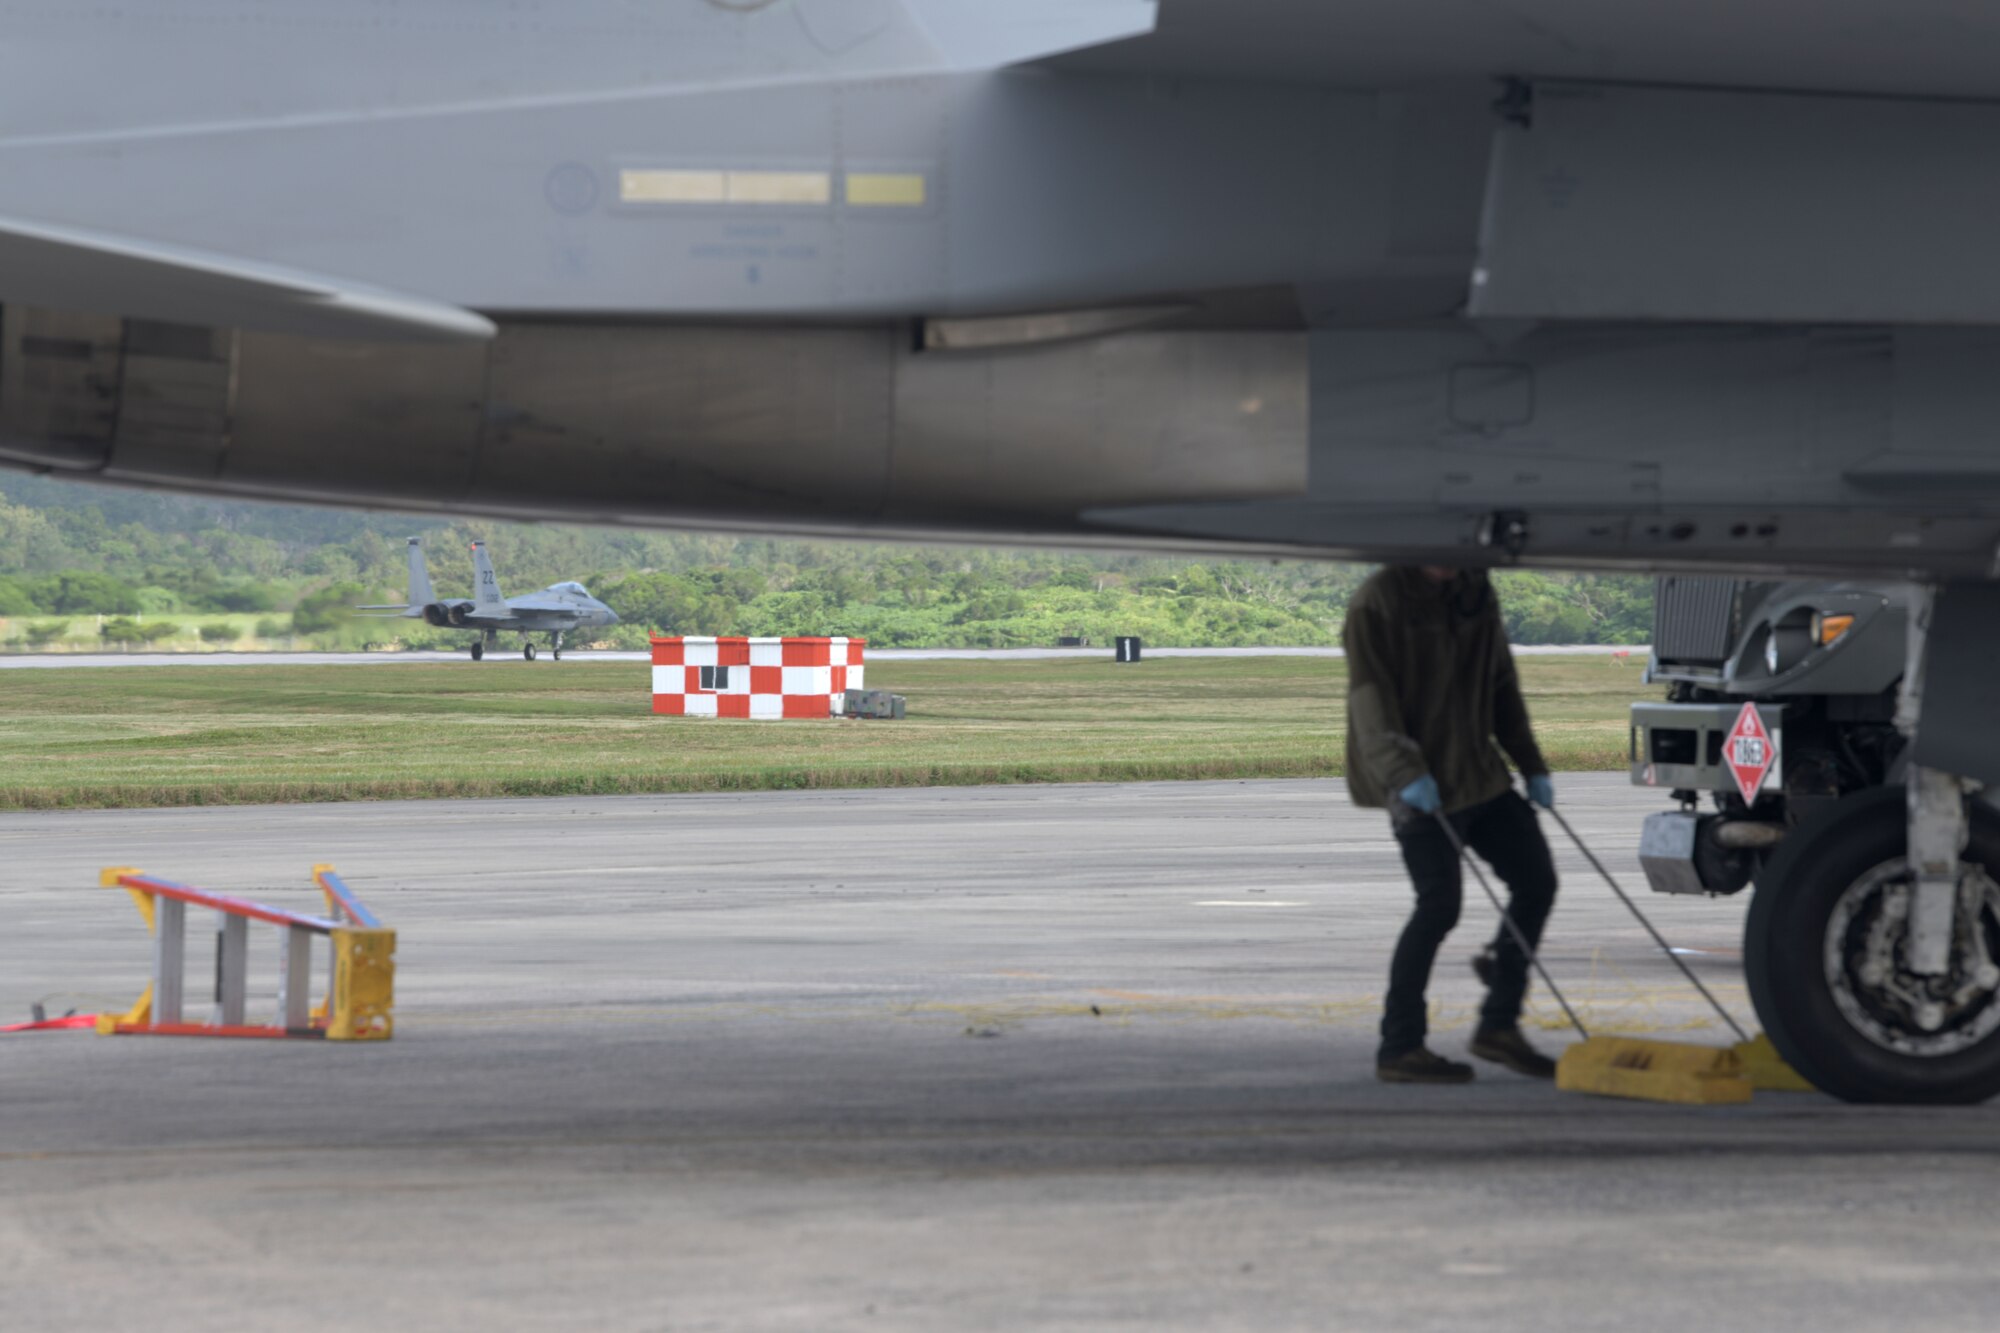 An F-15C Eagle taxis down the flight line of Kadena Air Base, Japan, during a “Super Surge,” Nov. 18, 2020. The 44th and 67th Fighter Squadrons set a new record for the most F-15C Eagles flown in a week at 437 sorties; the previous record was 245 sorties. (U.S. Air Force photo by Airman 1st Class Rebeckah Medeiros)